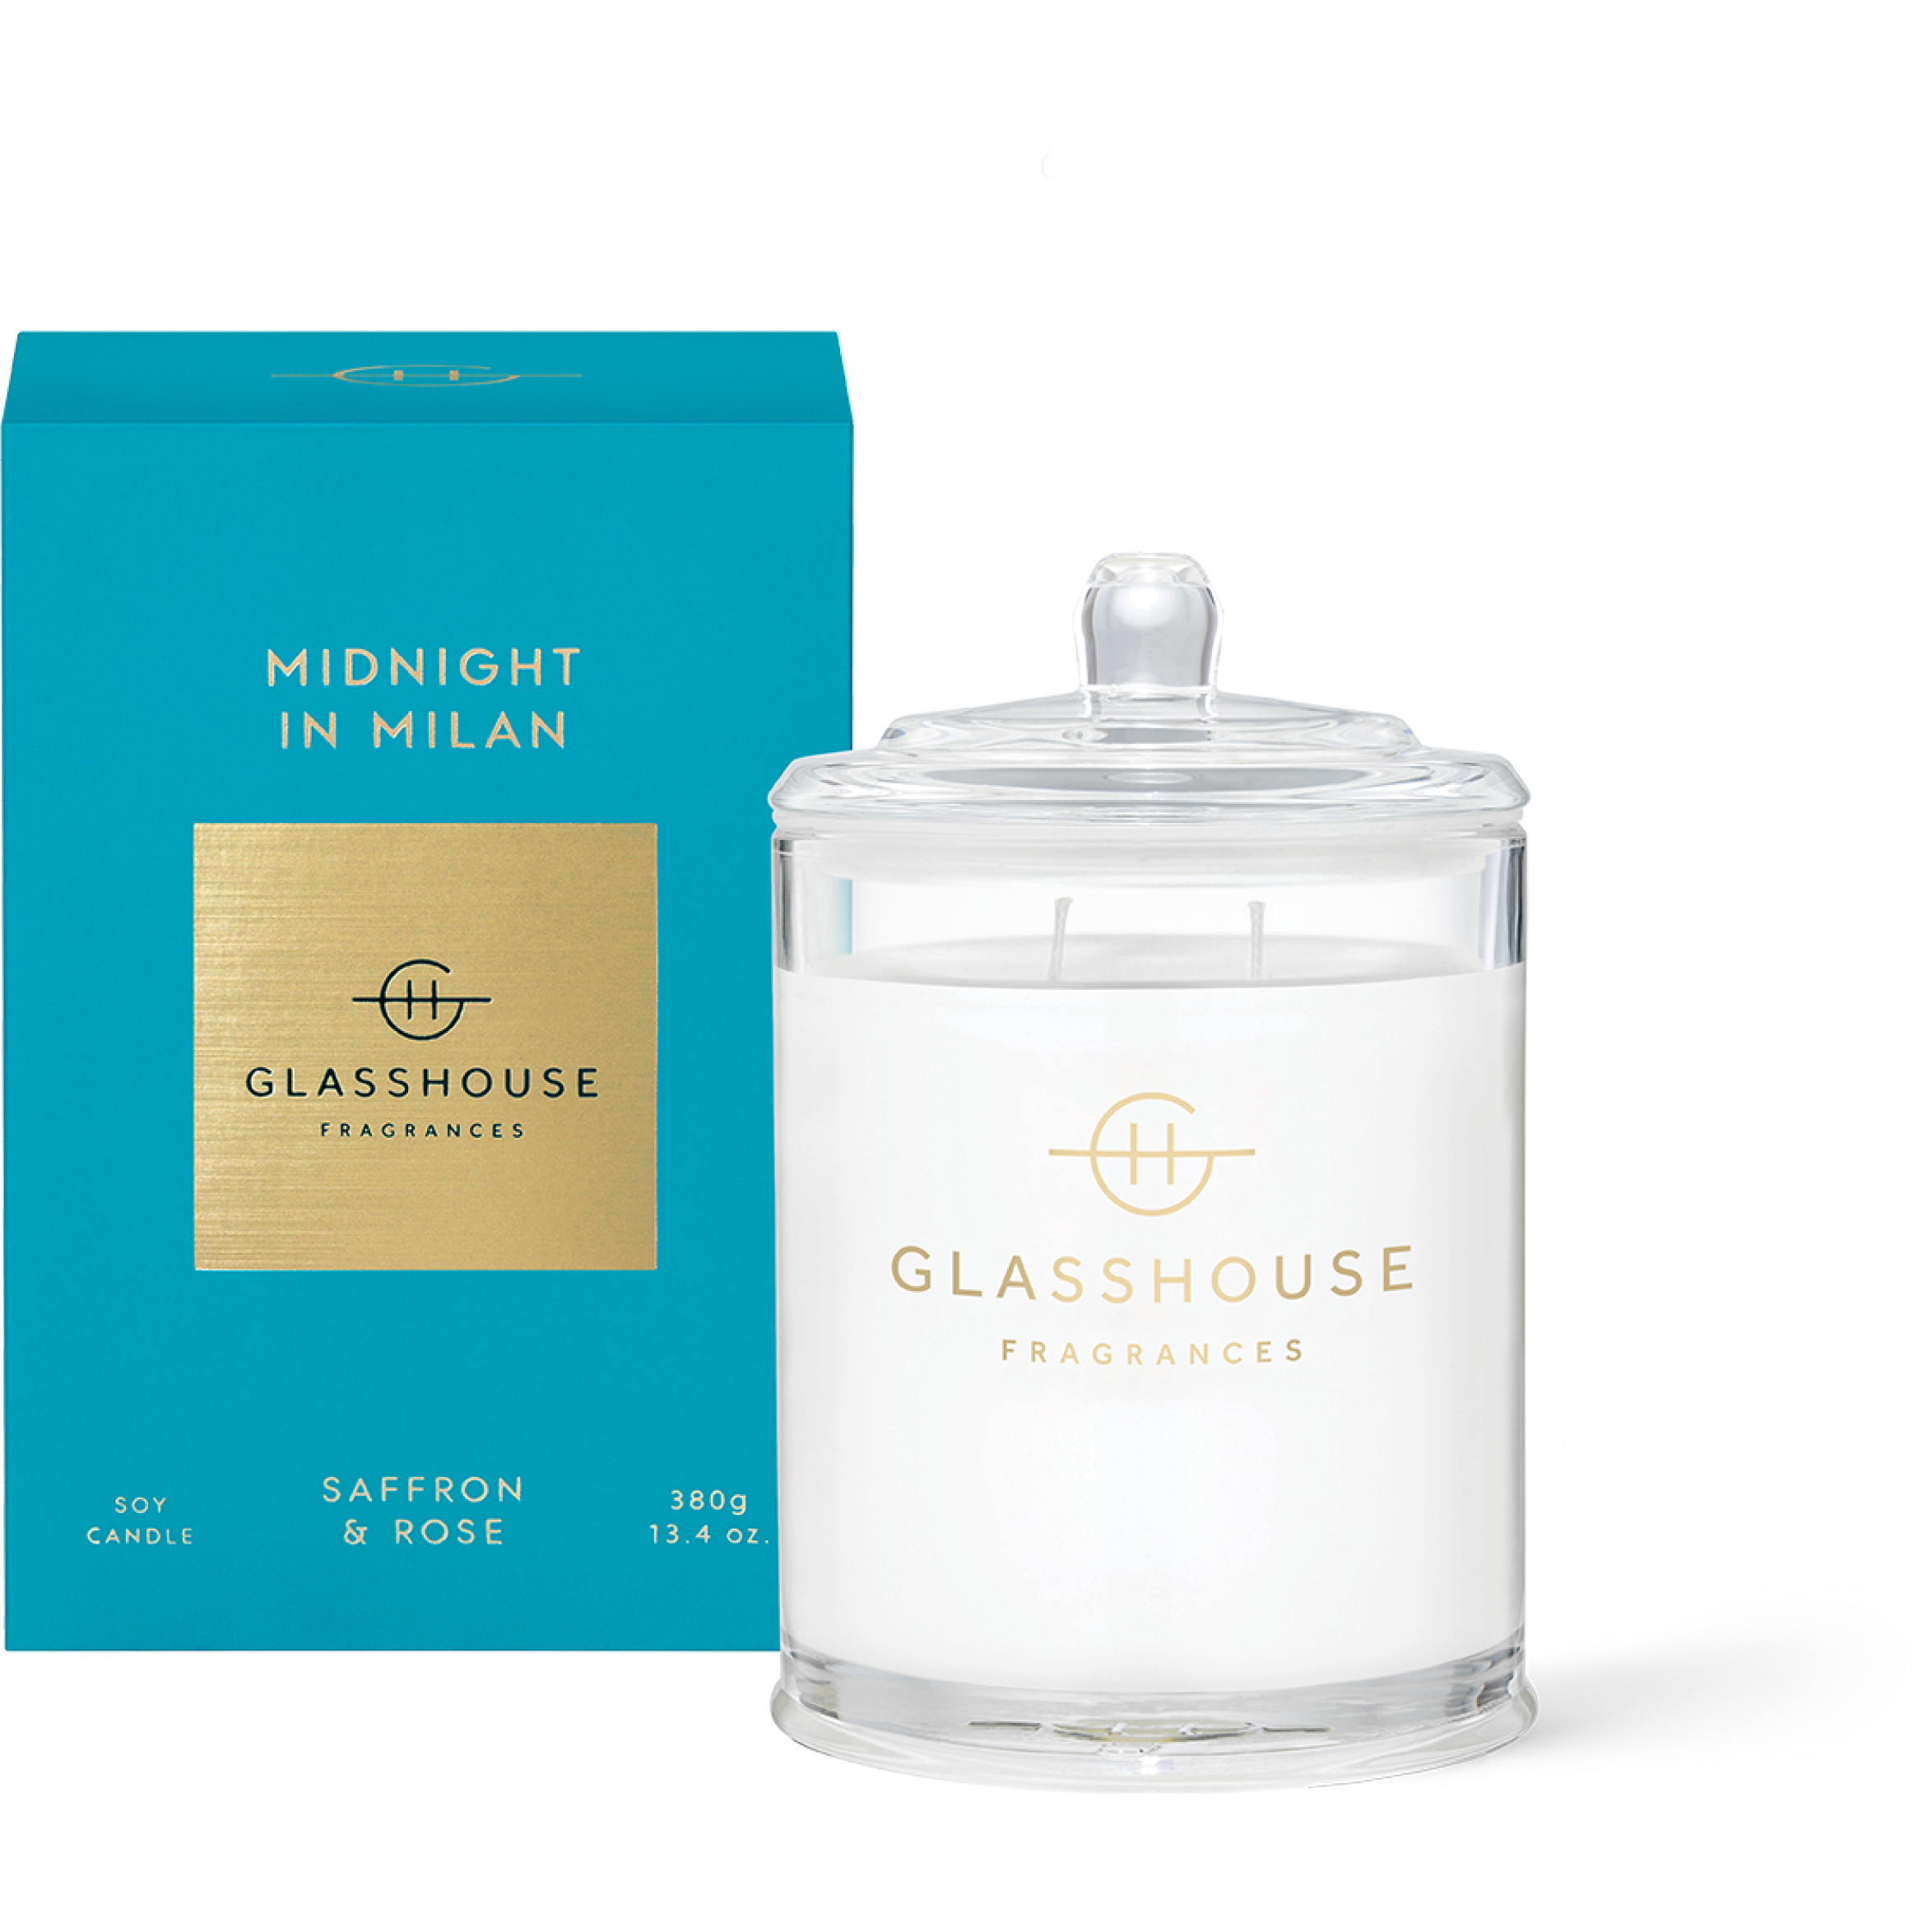 Glasshouse MIDNIGHT IN MILAN Candle